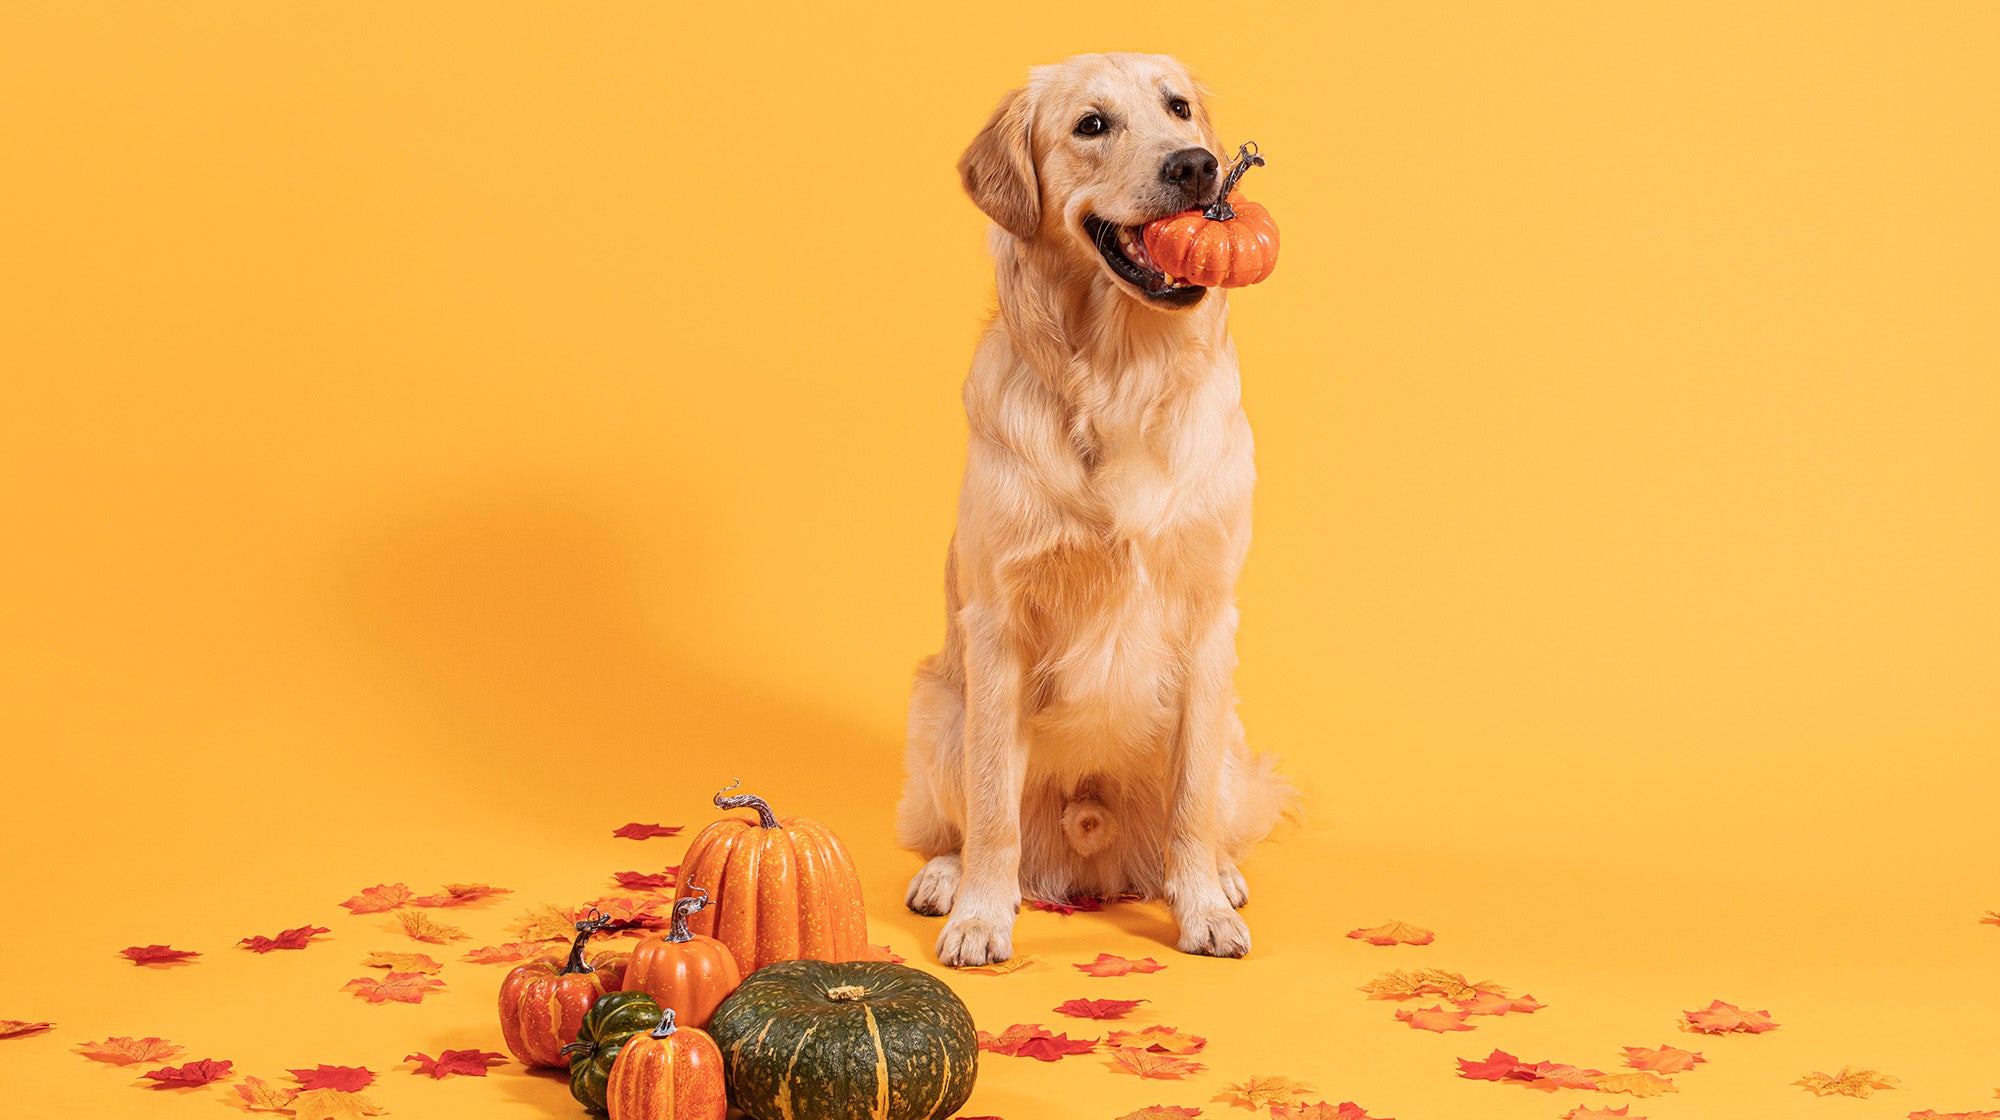 A golden Labrador, with a small pumpkin in its mouth, surrounded by pumpkin and squash, against a pale yellow background